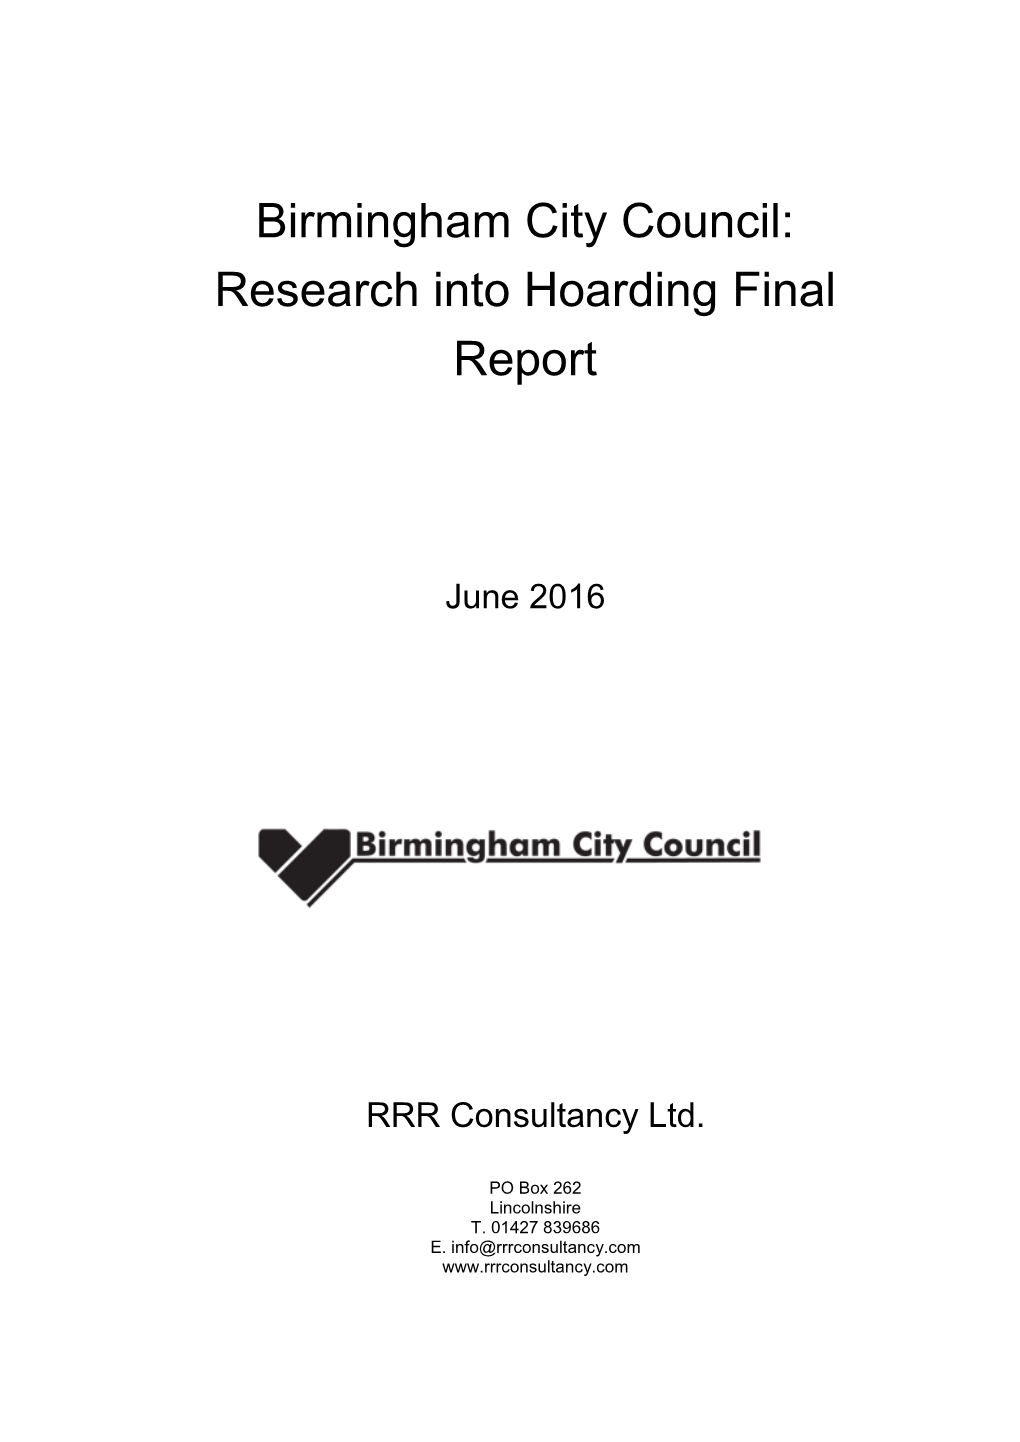 Birmingham City Council: Research Into Hoarding Final Report